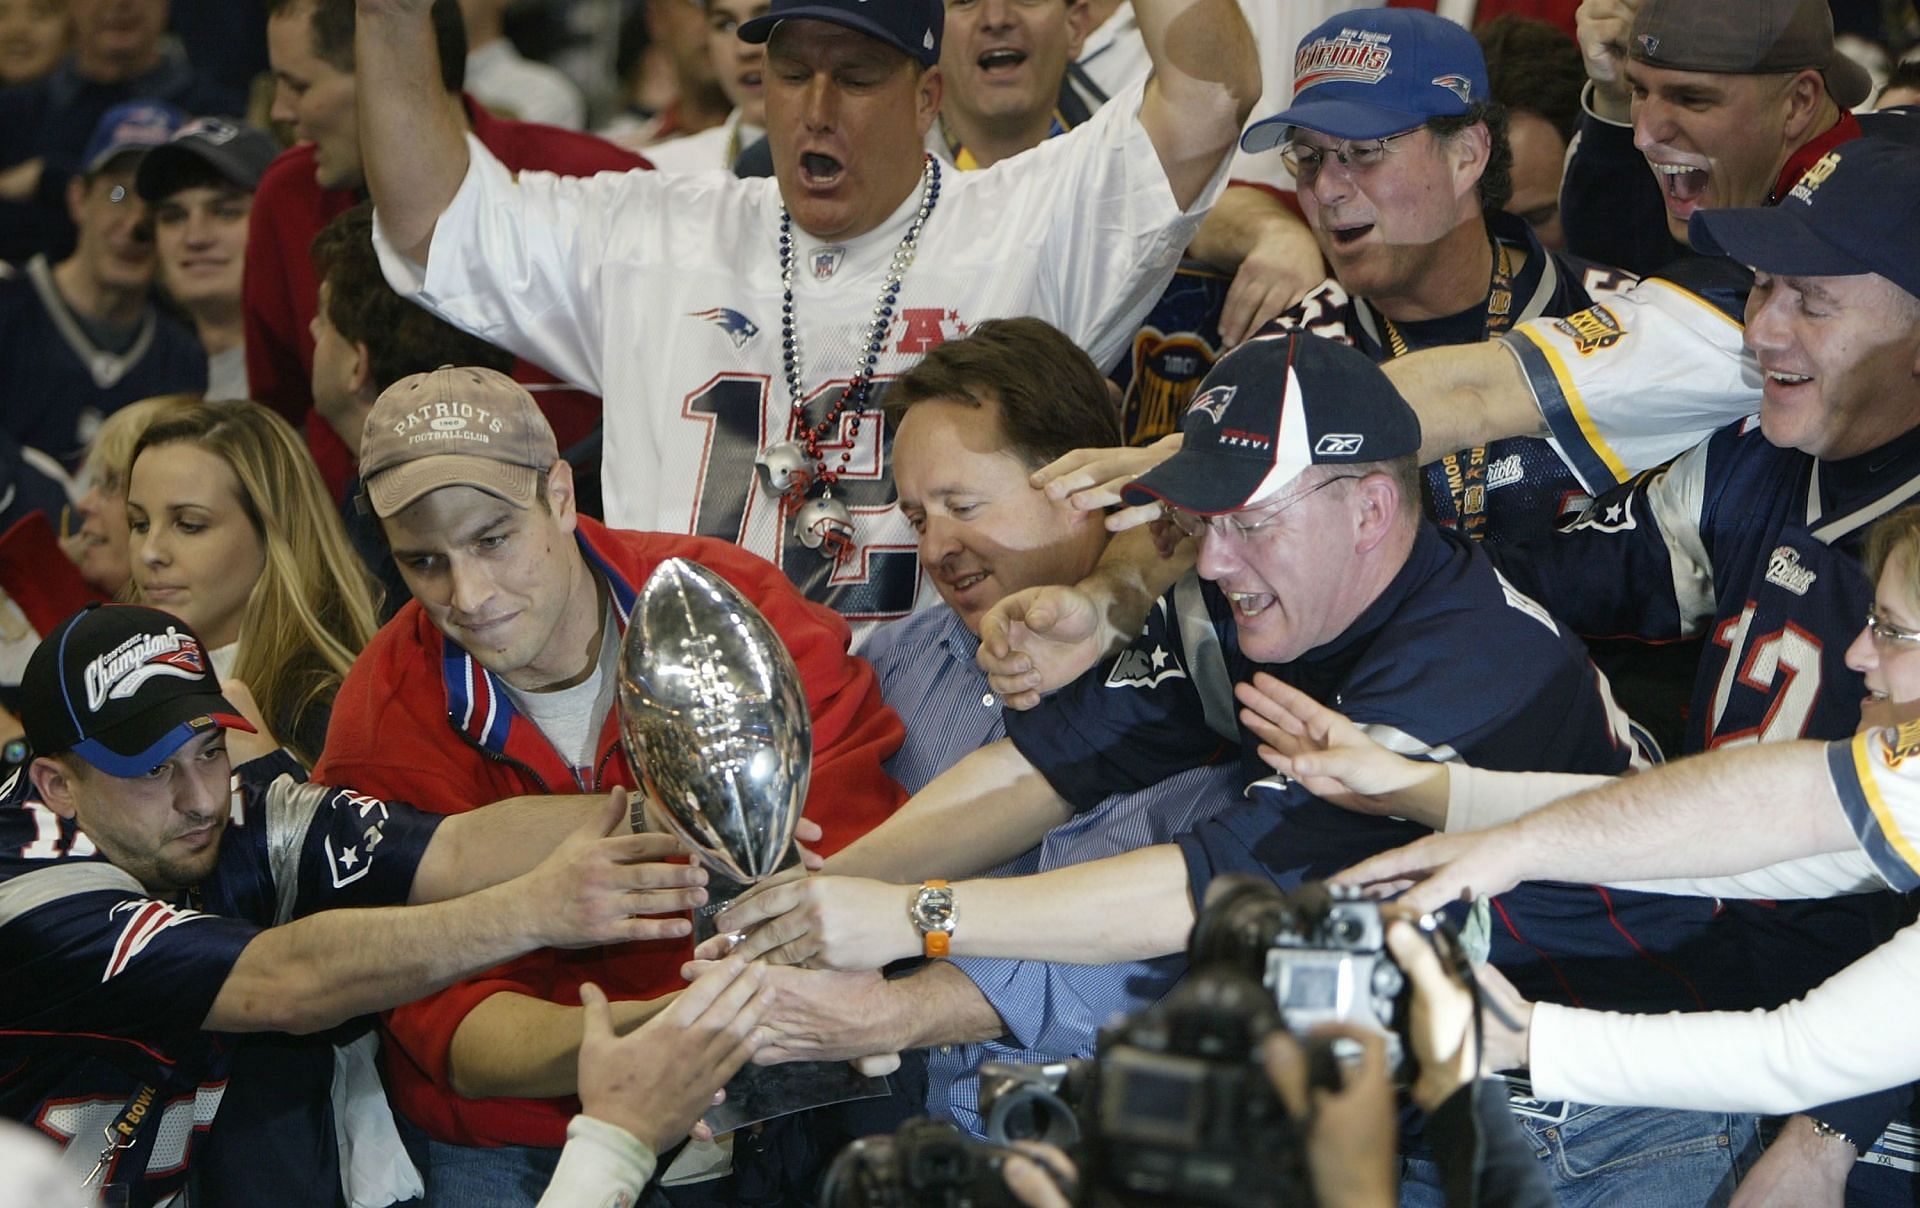 Patriots defeat Panthers to secure their second Super Bowl victory in 2004